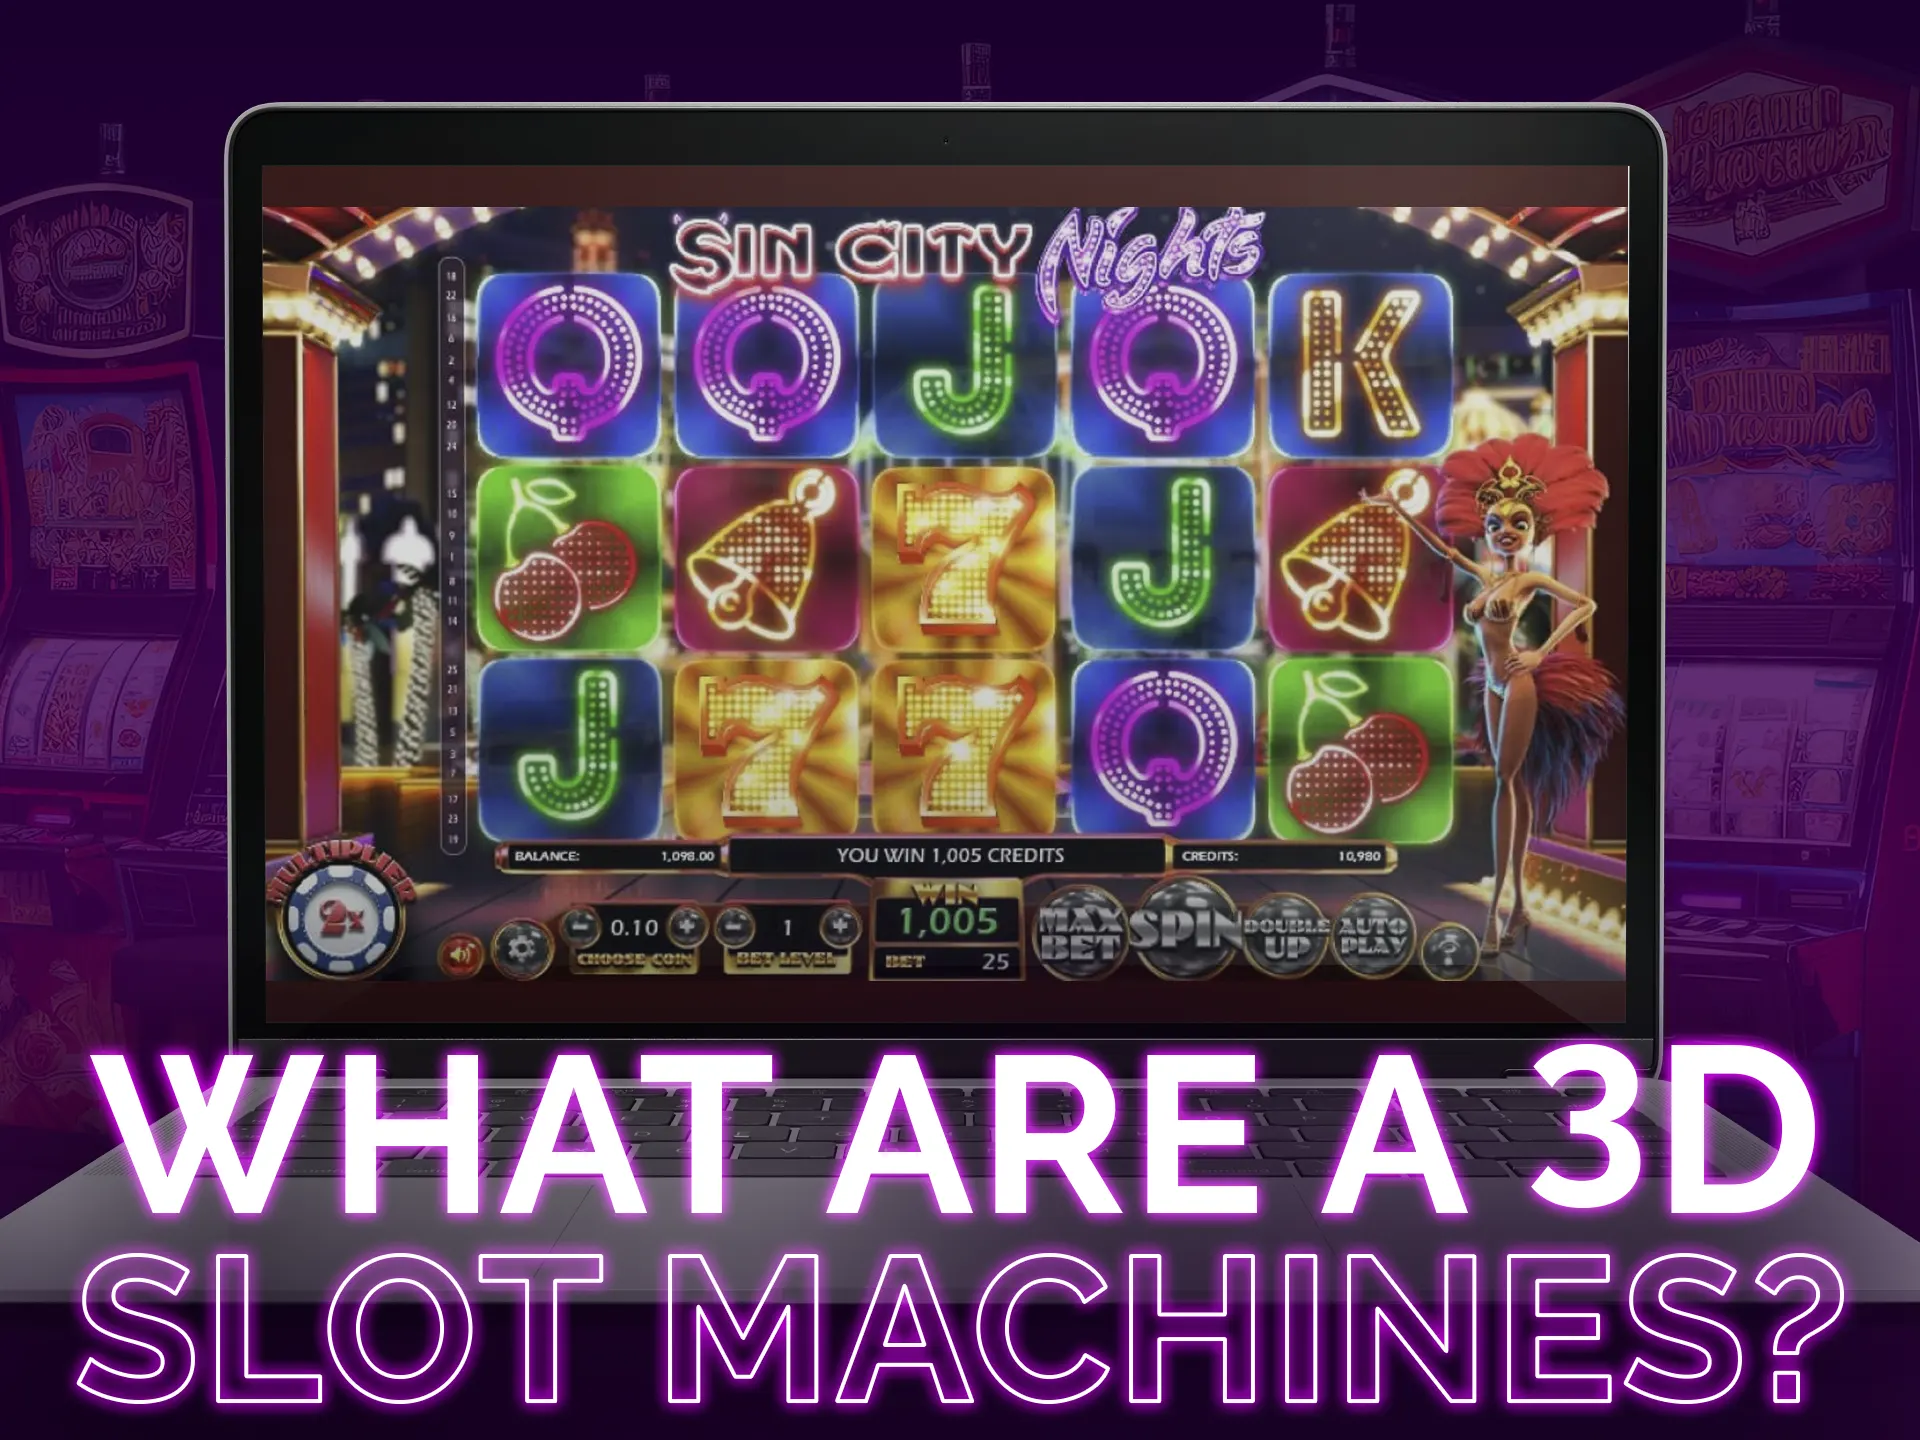 3D slots are a more vibrant and exciting version of slots.